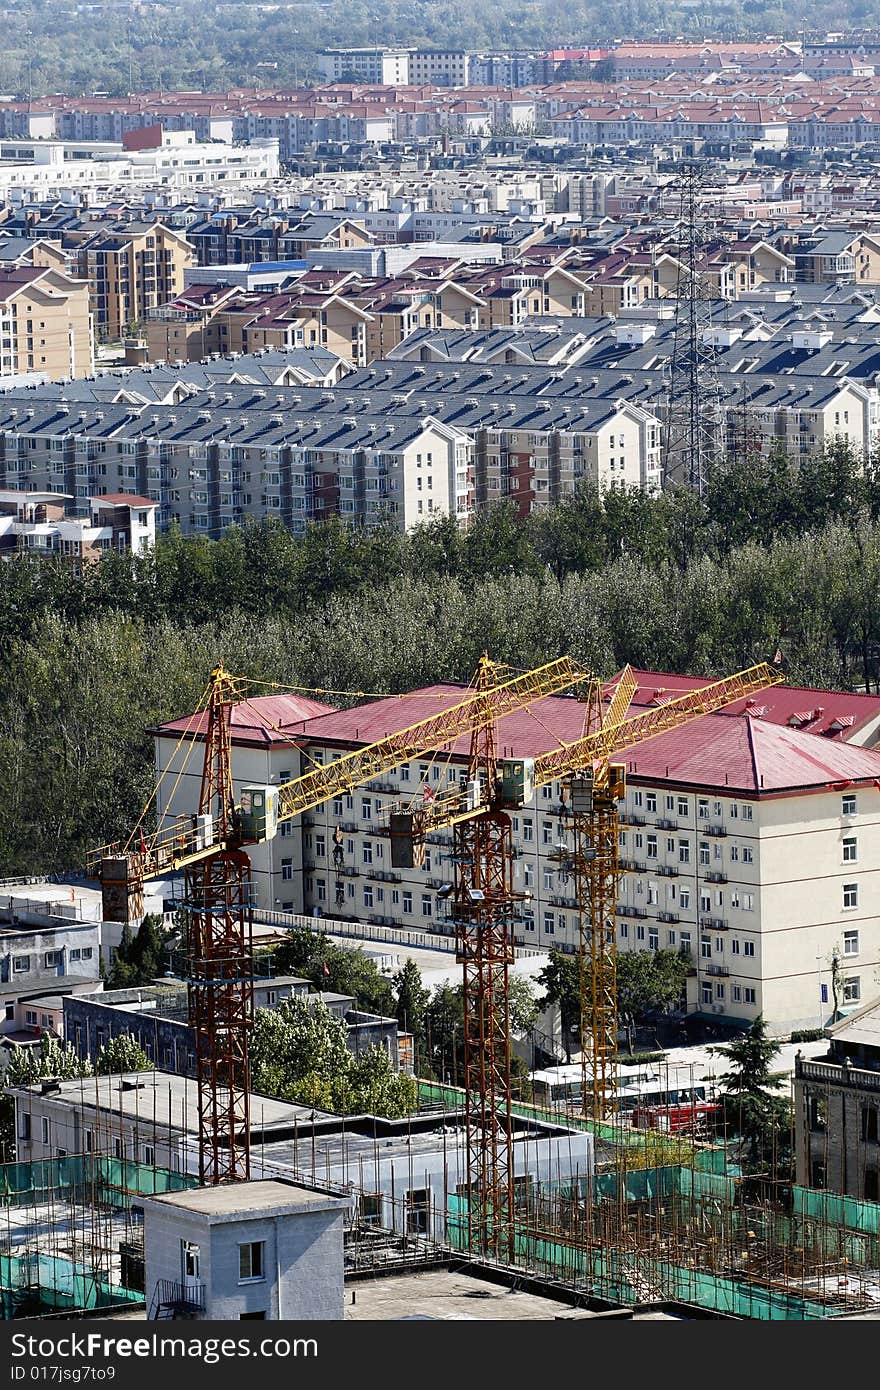 Large-scale residential area of city in construction. In Beijing China. Large-scale residential area of city in construction. In Beijing China.